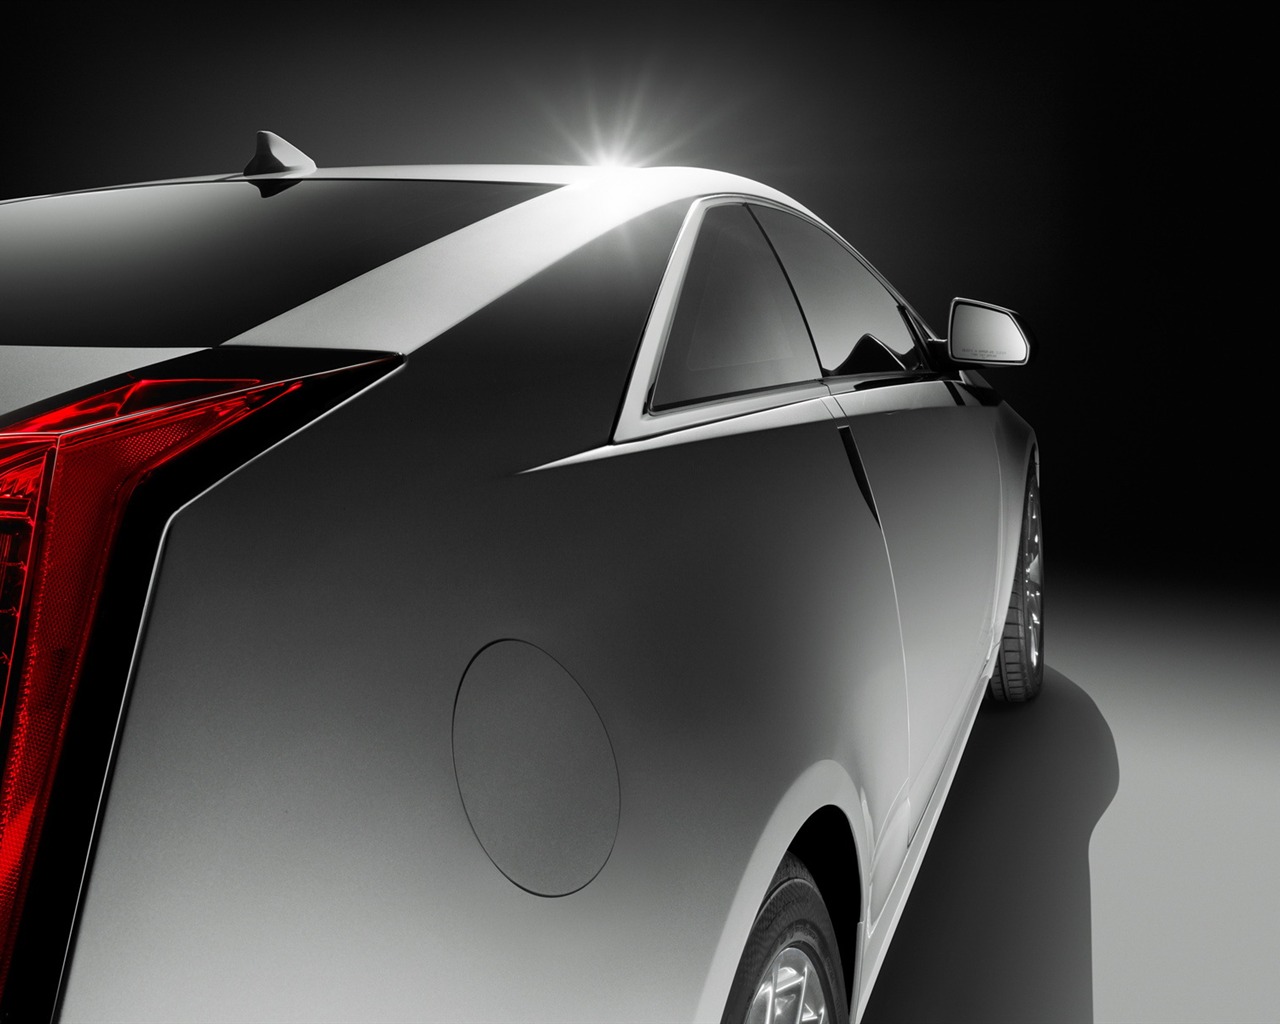 Cadillac CTS Coupe - 2011 凯迪拉克8 - 1280x1024